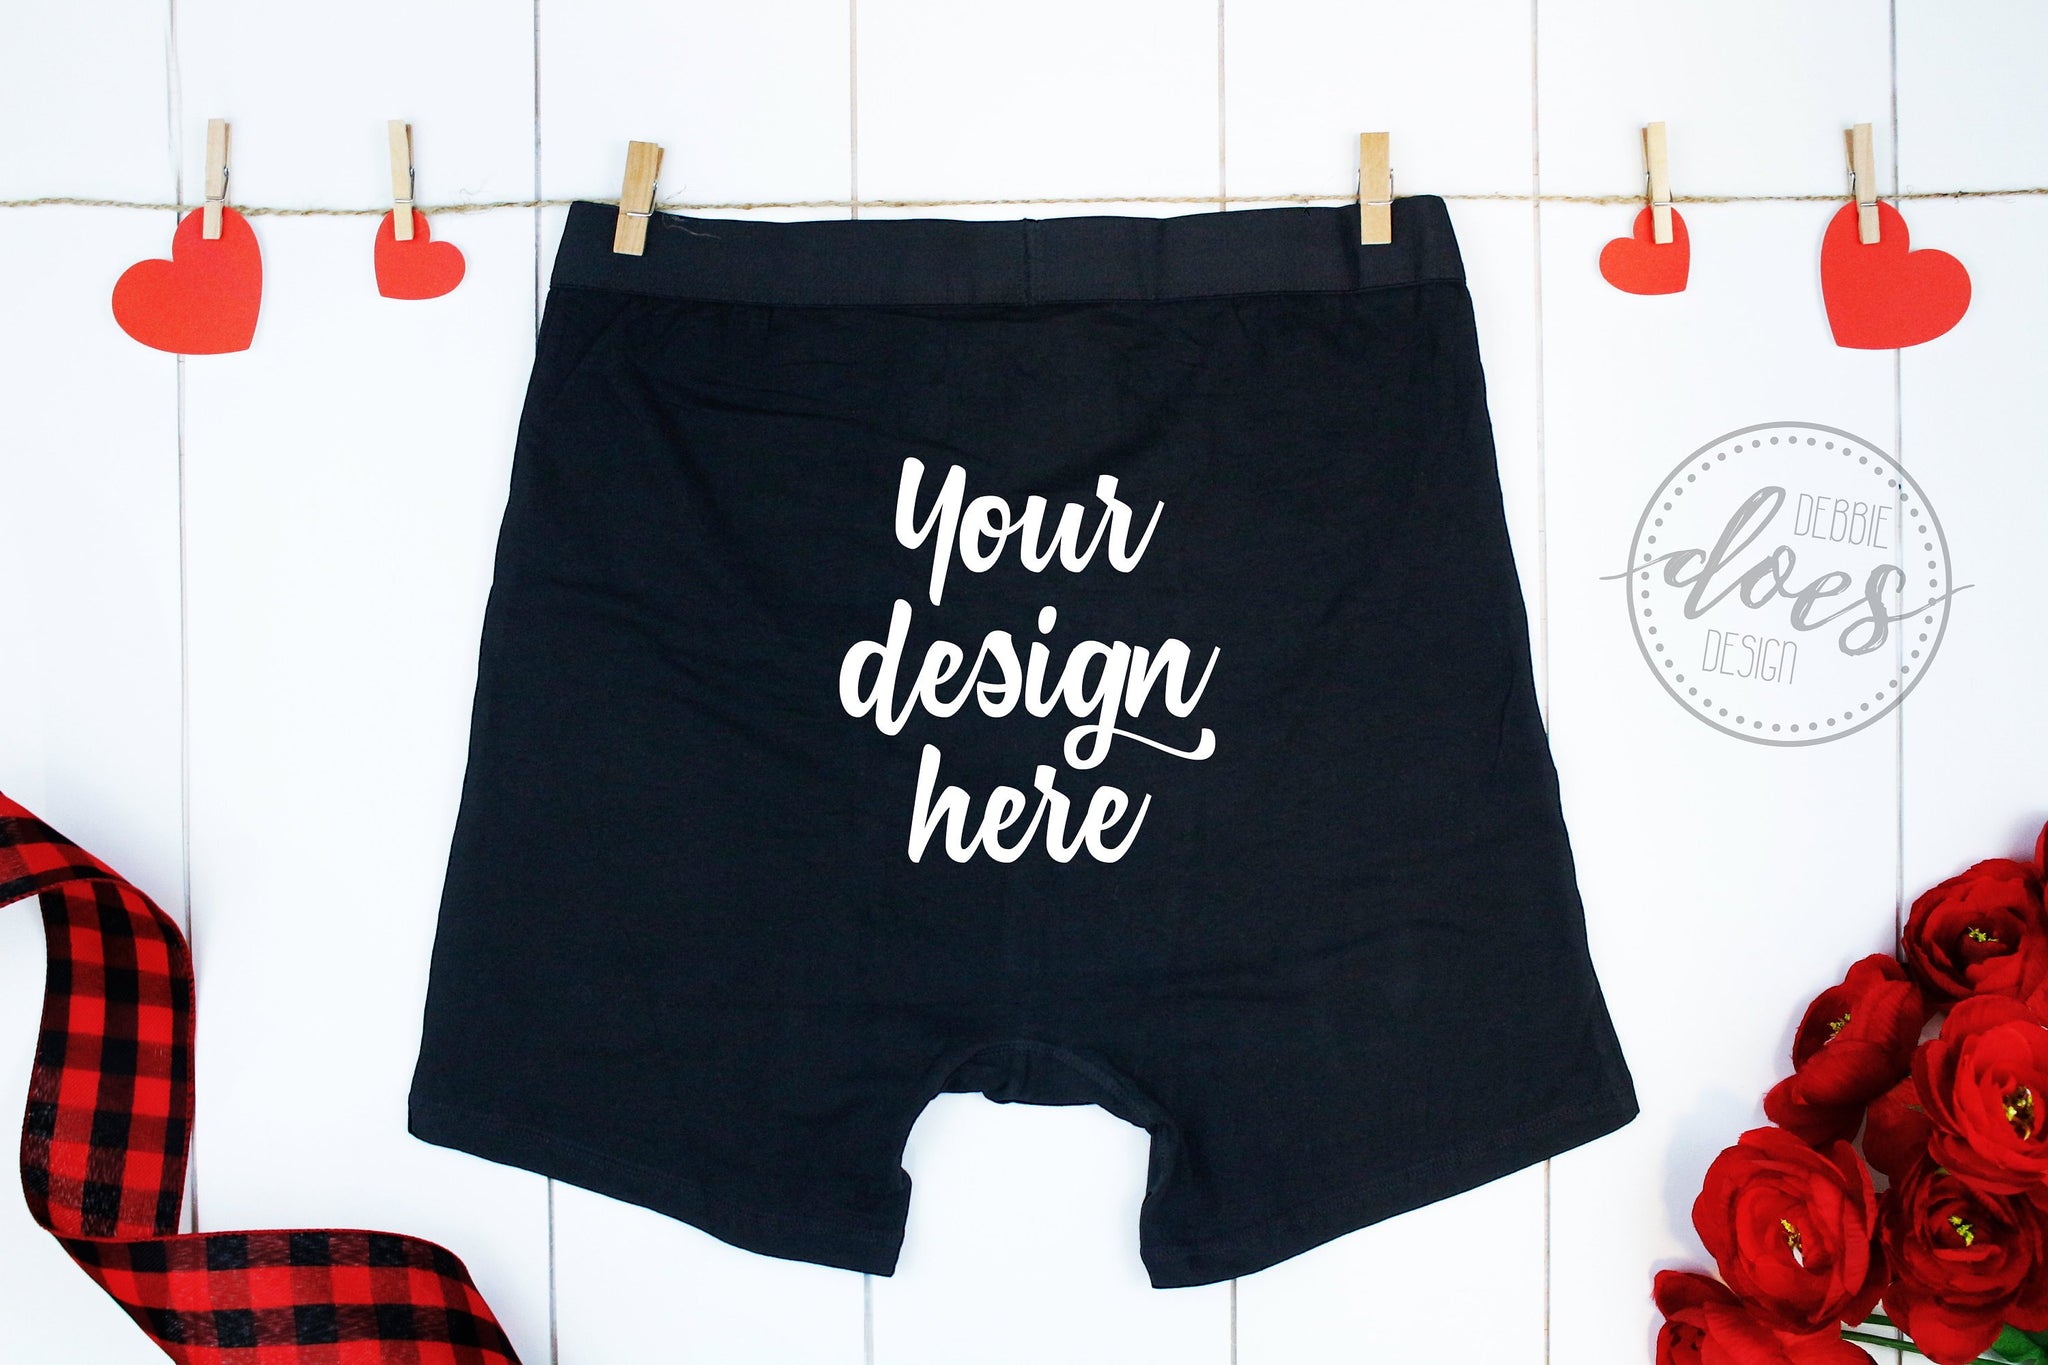 Black Boxer Briefs Mockup with Hearts and Roses | BACK VIEW - Debbie Does Design